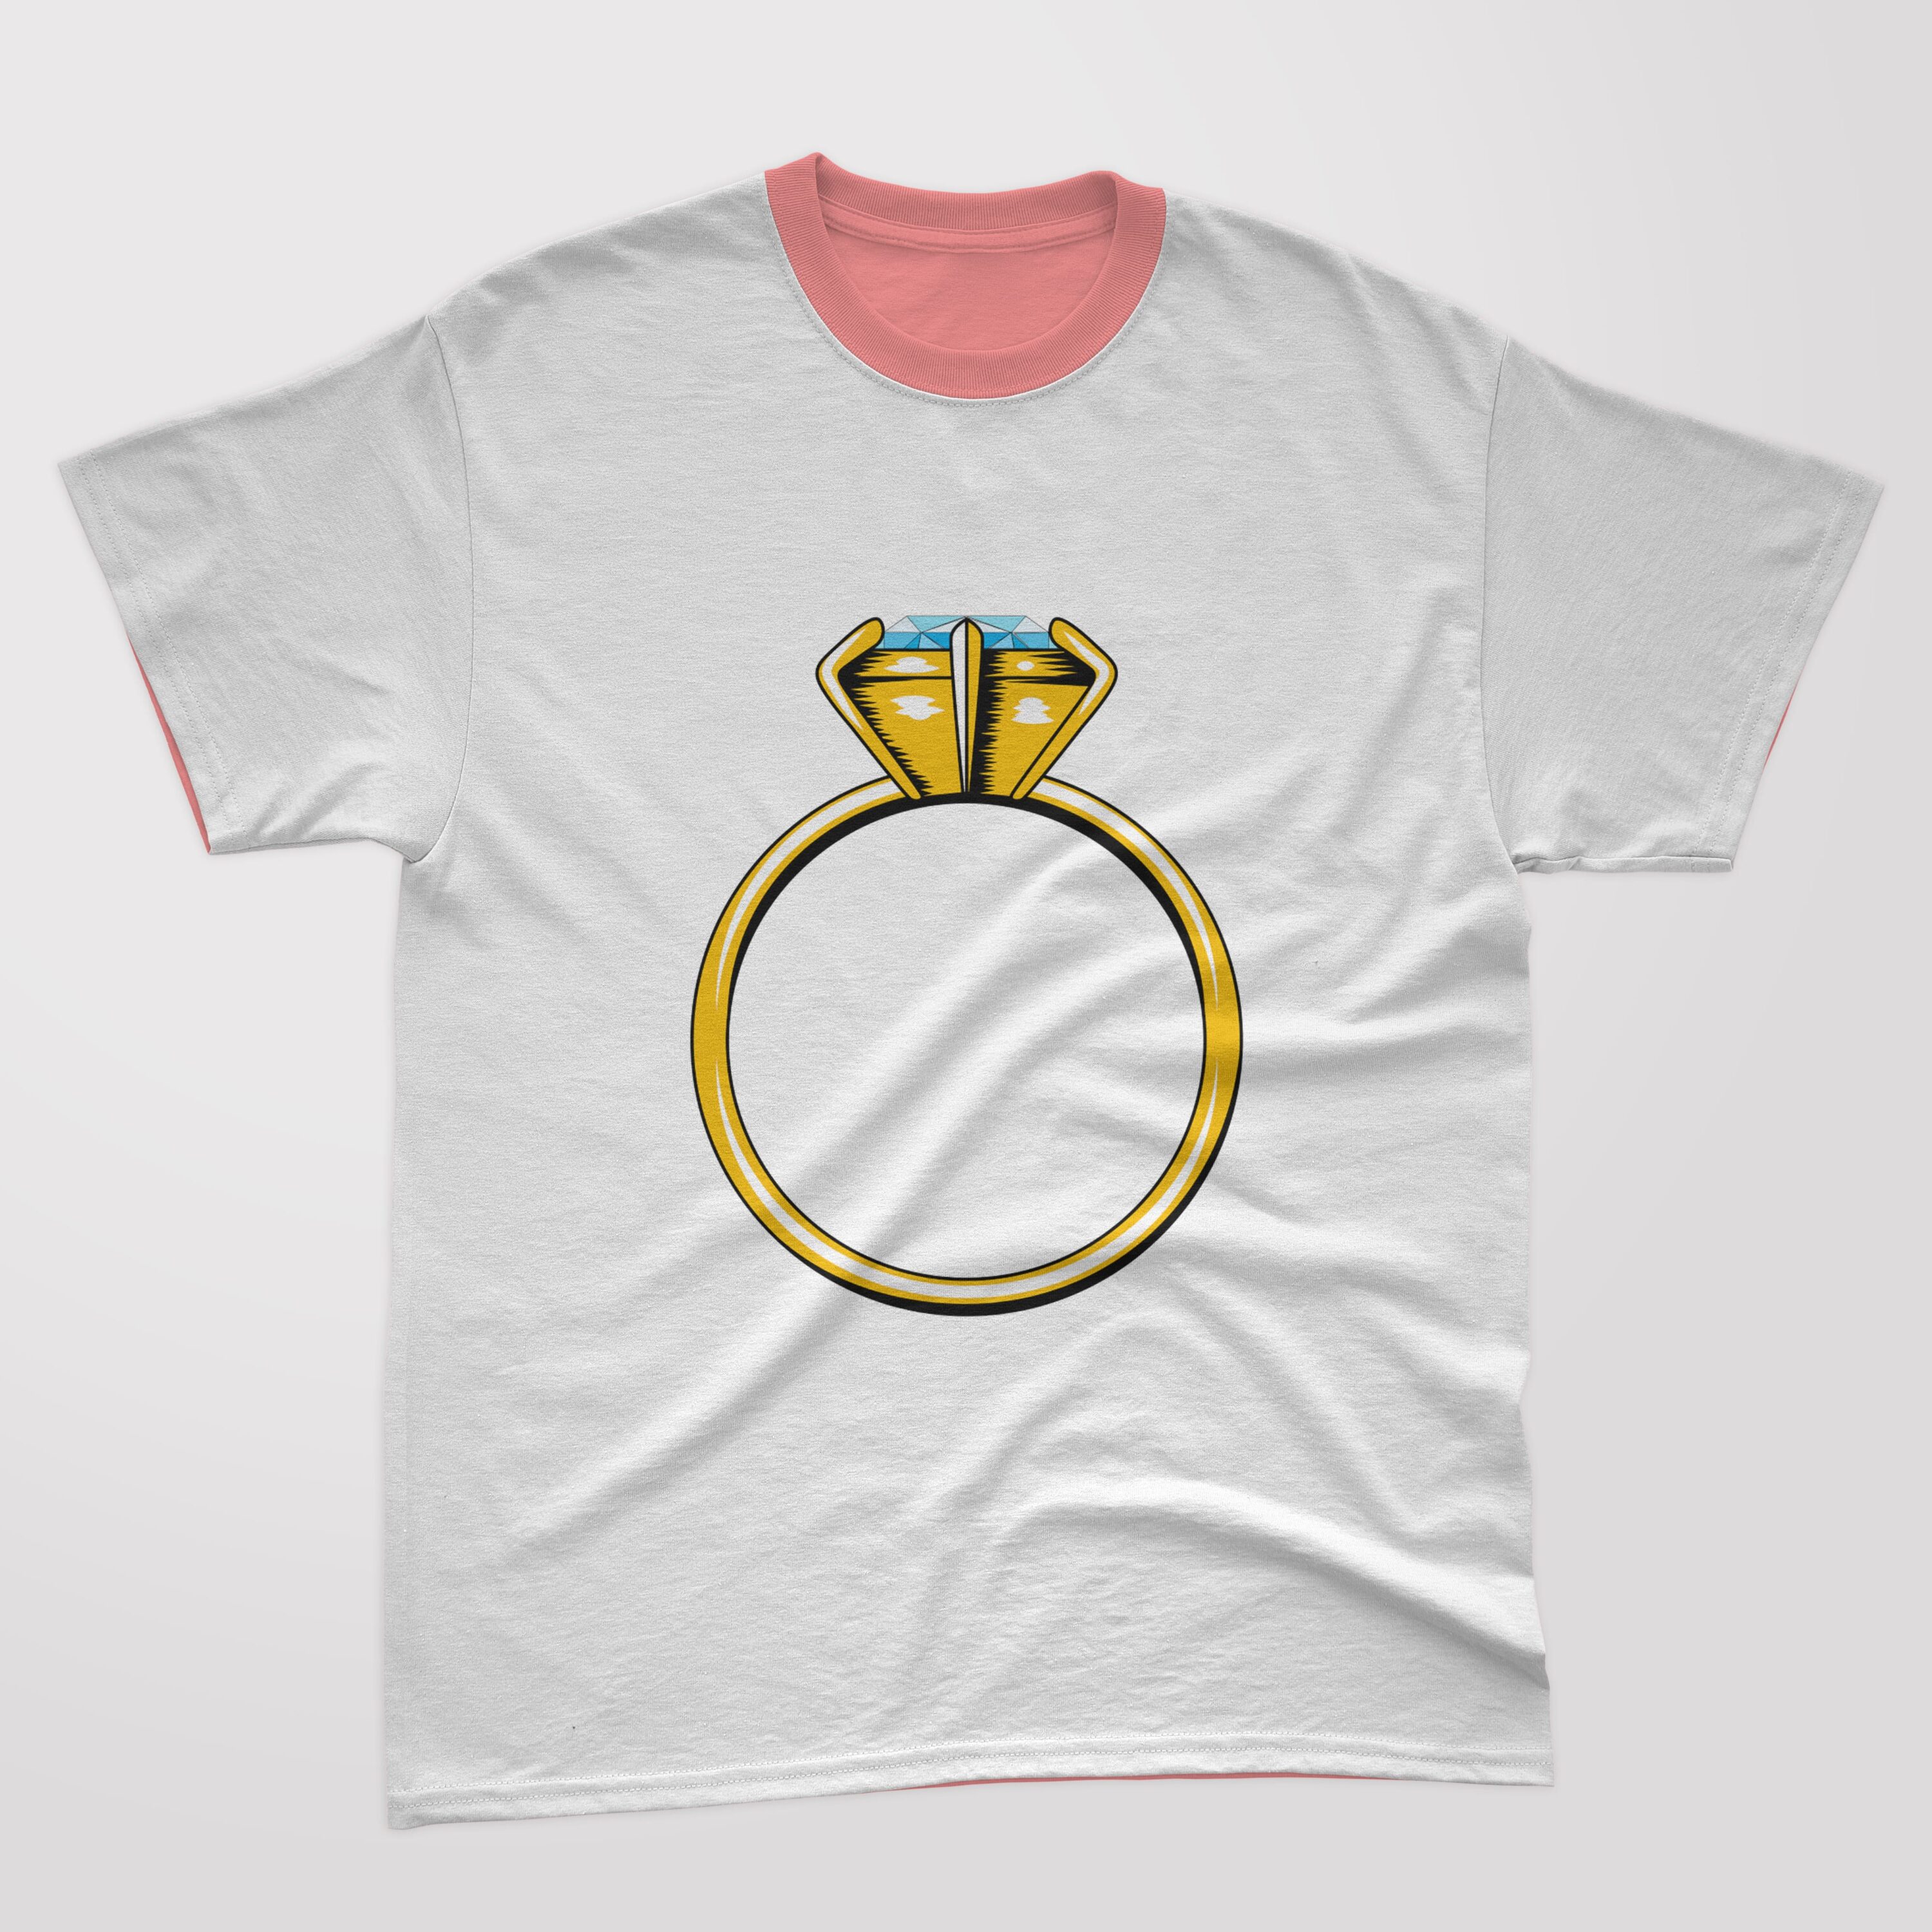 T-shirt picture with exquisite diamond ring print.